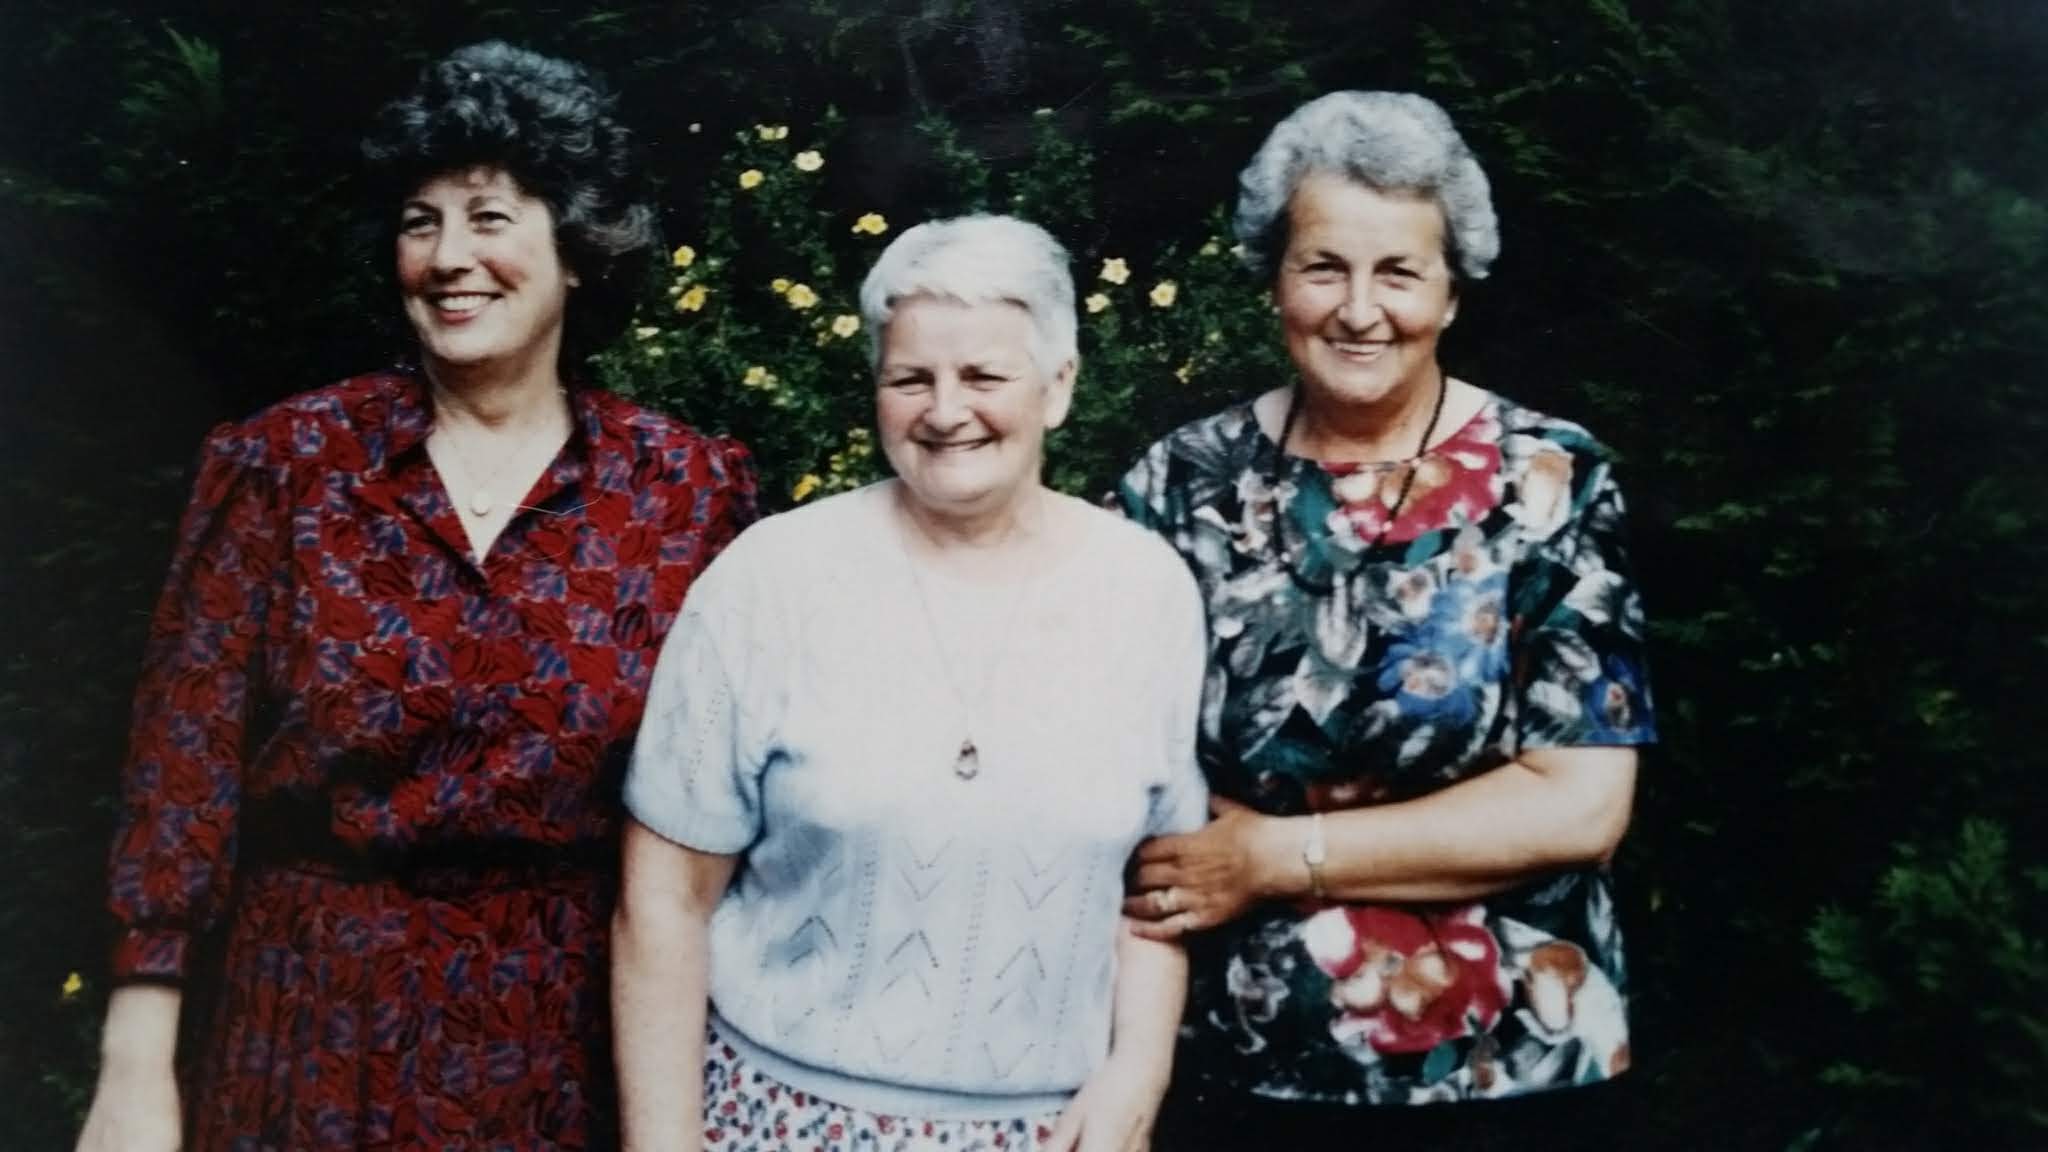 Geordie Burrell's Lassies, July 1989, Linked To: <a href='profiles/i455.html' >George Burrell *</a> and <a href='profiles/i410.html' >Mary (May) Geddes MacGregor Burrell</a> and <a href='profiles/i411.html' >Sheila MacGregor Burrell</a> and <a href='profiles/i452.html' >Agnes (Nessie) Cowan Burrell *</a>